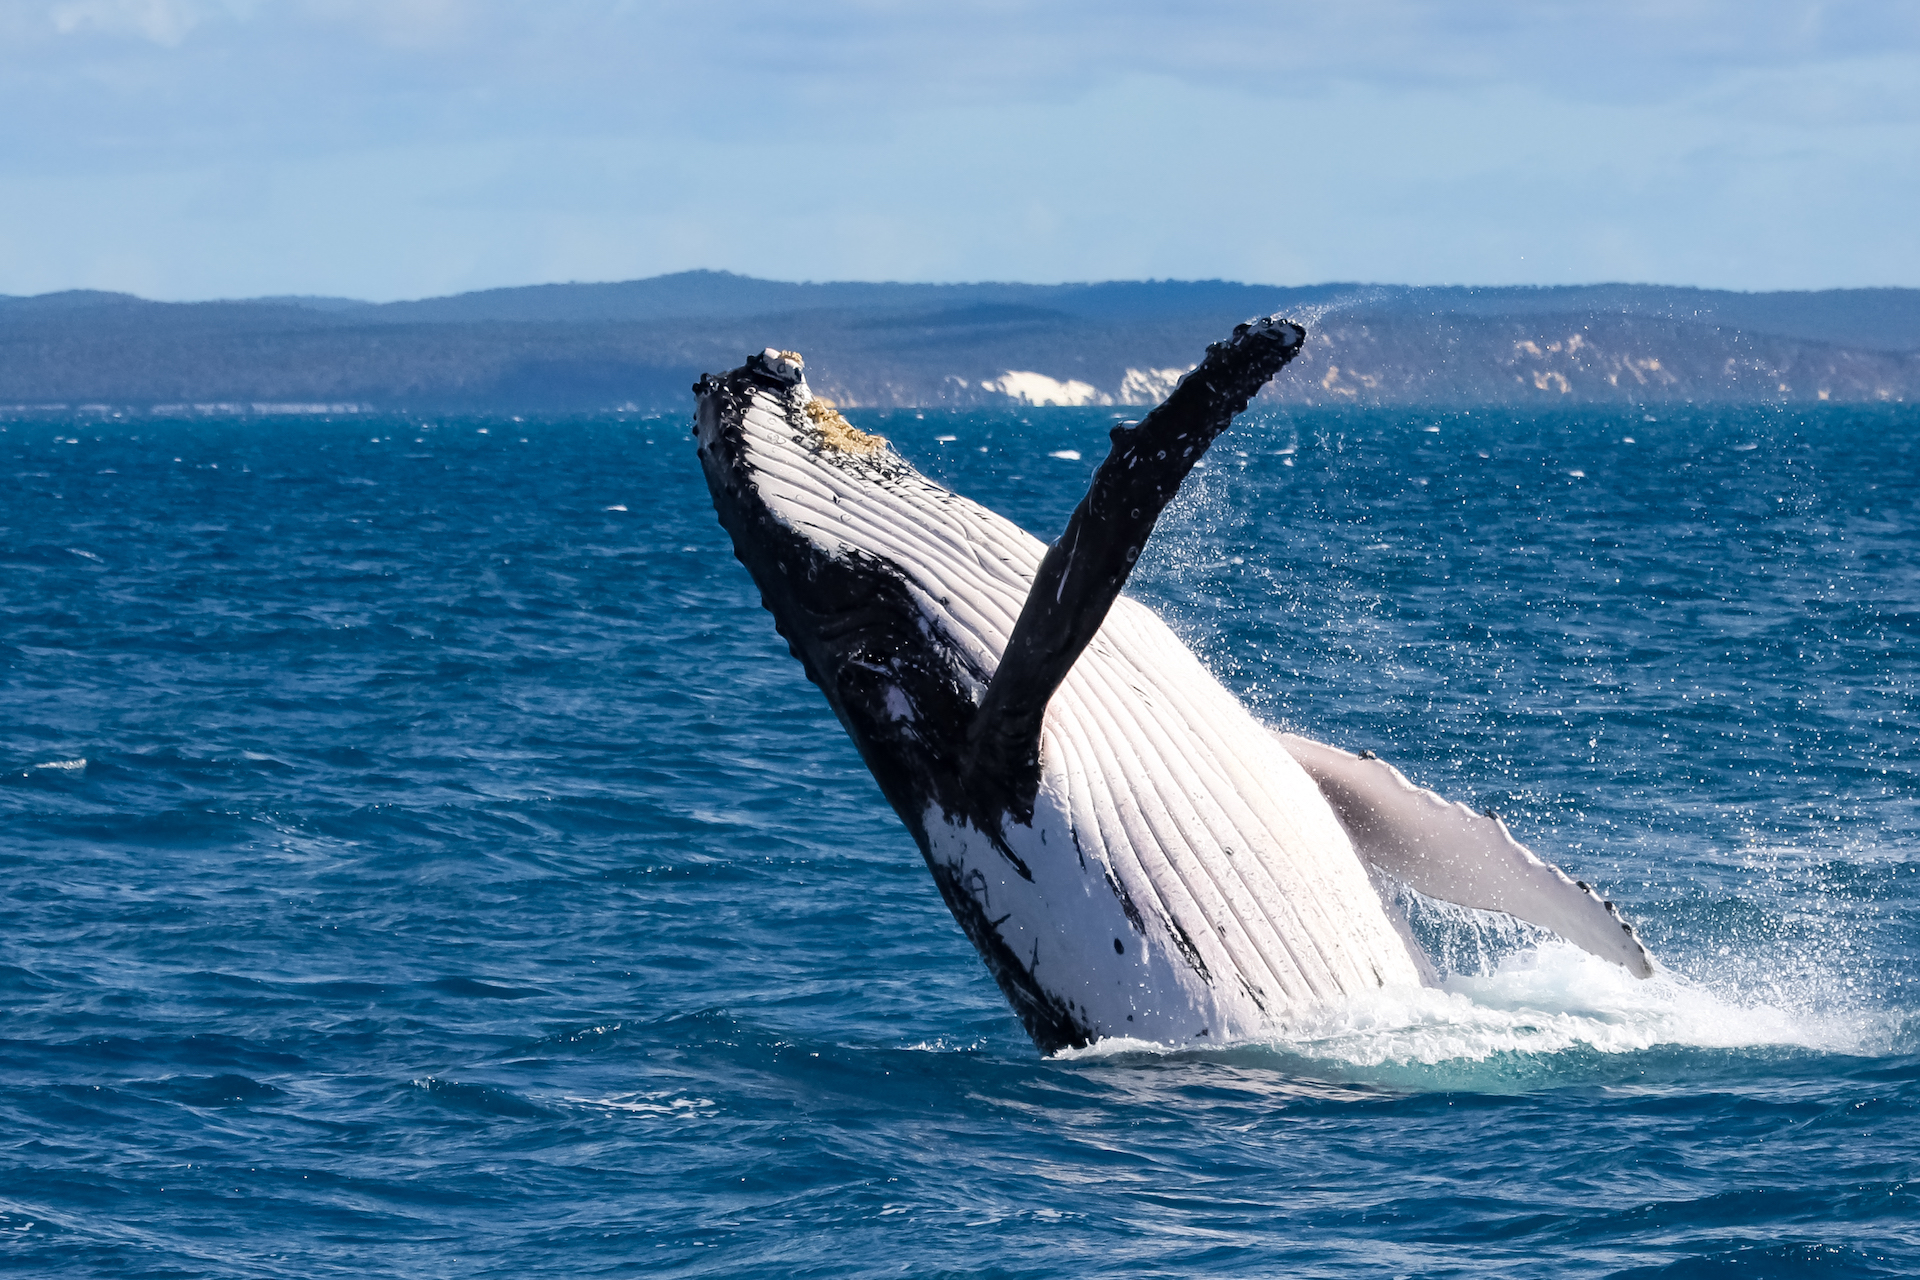 3 Hour Winter Whale Safari (May - Oct) around King George Sound